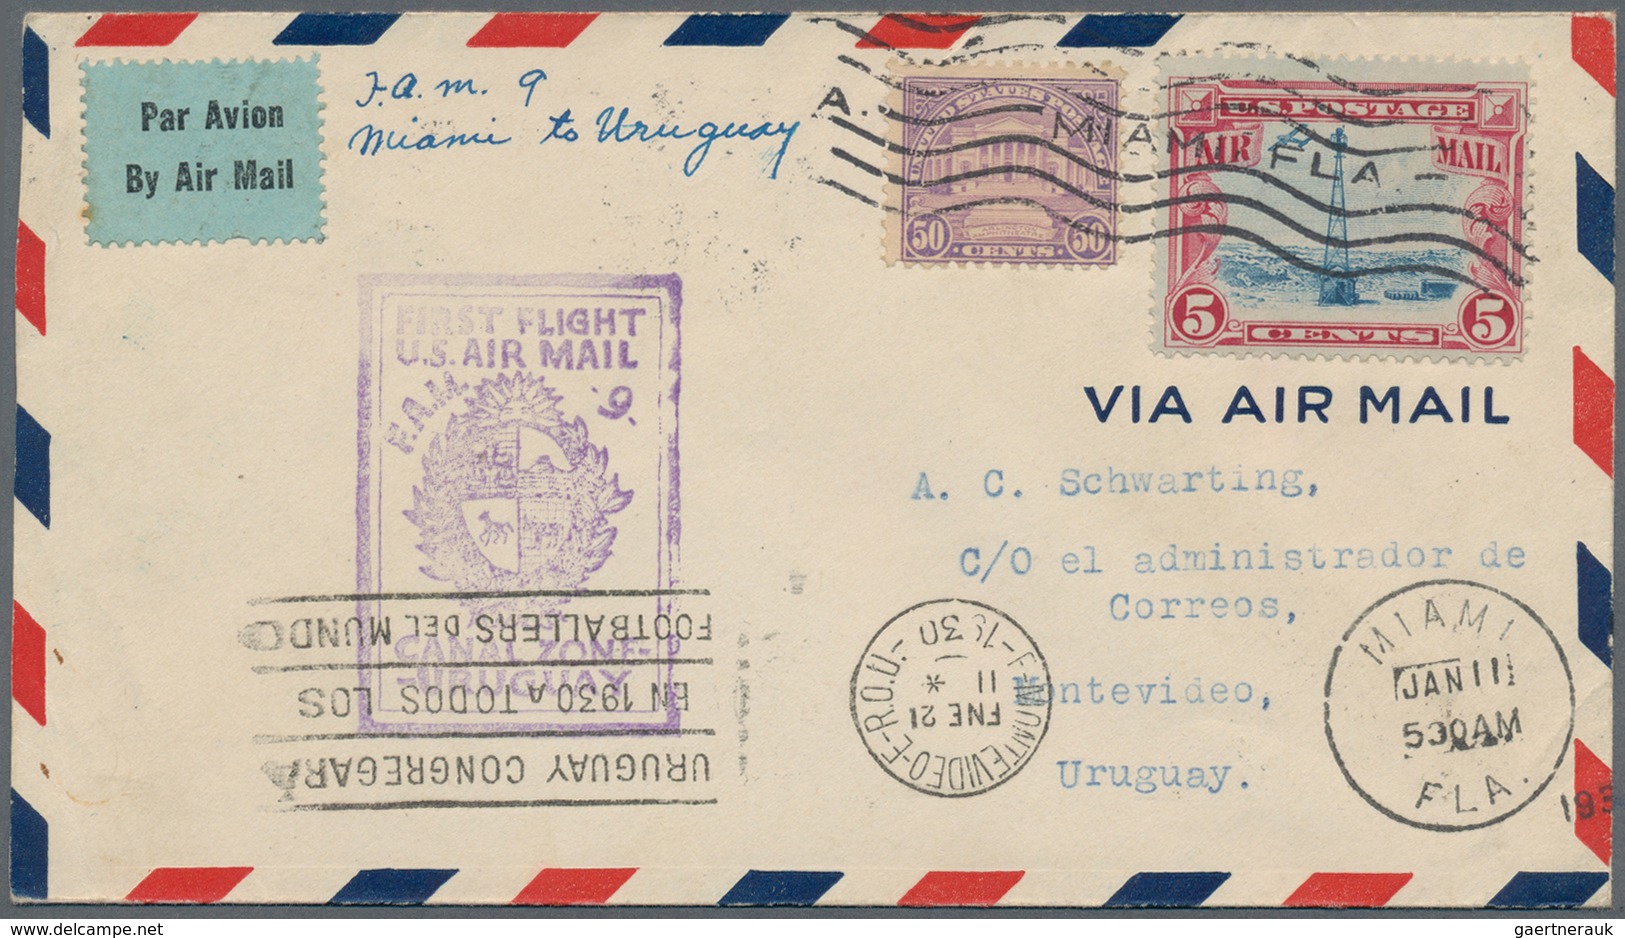 Amerika: 1893/1930, lot of 19 covers/cards, e.g. destination China, redirected mail, maritime markin